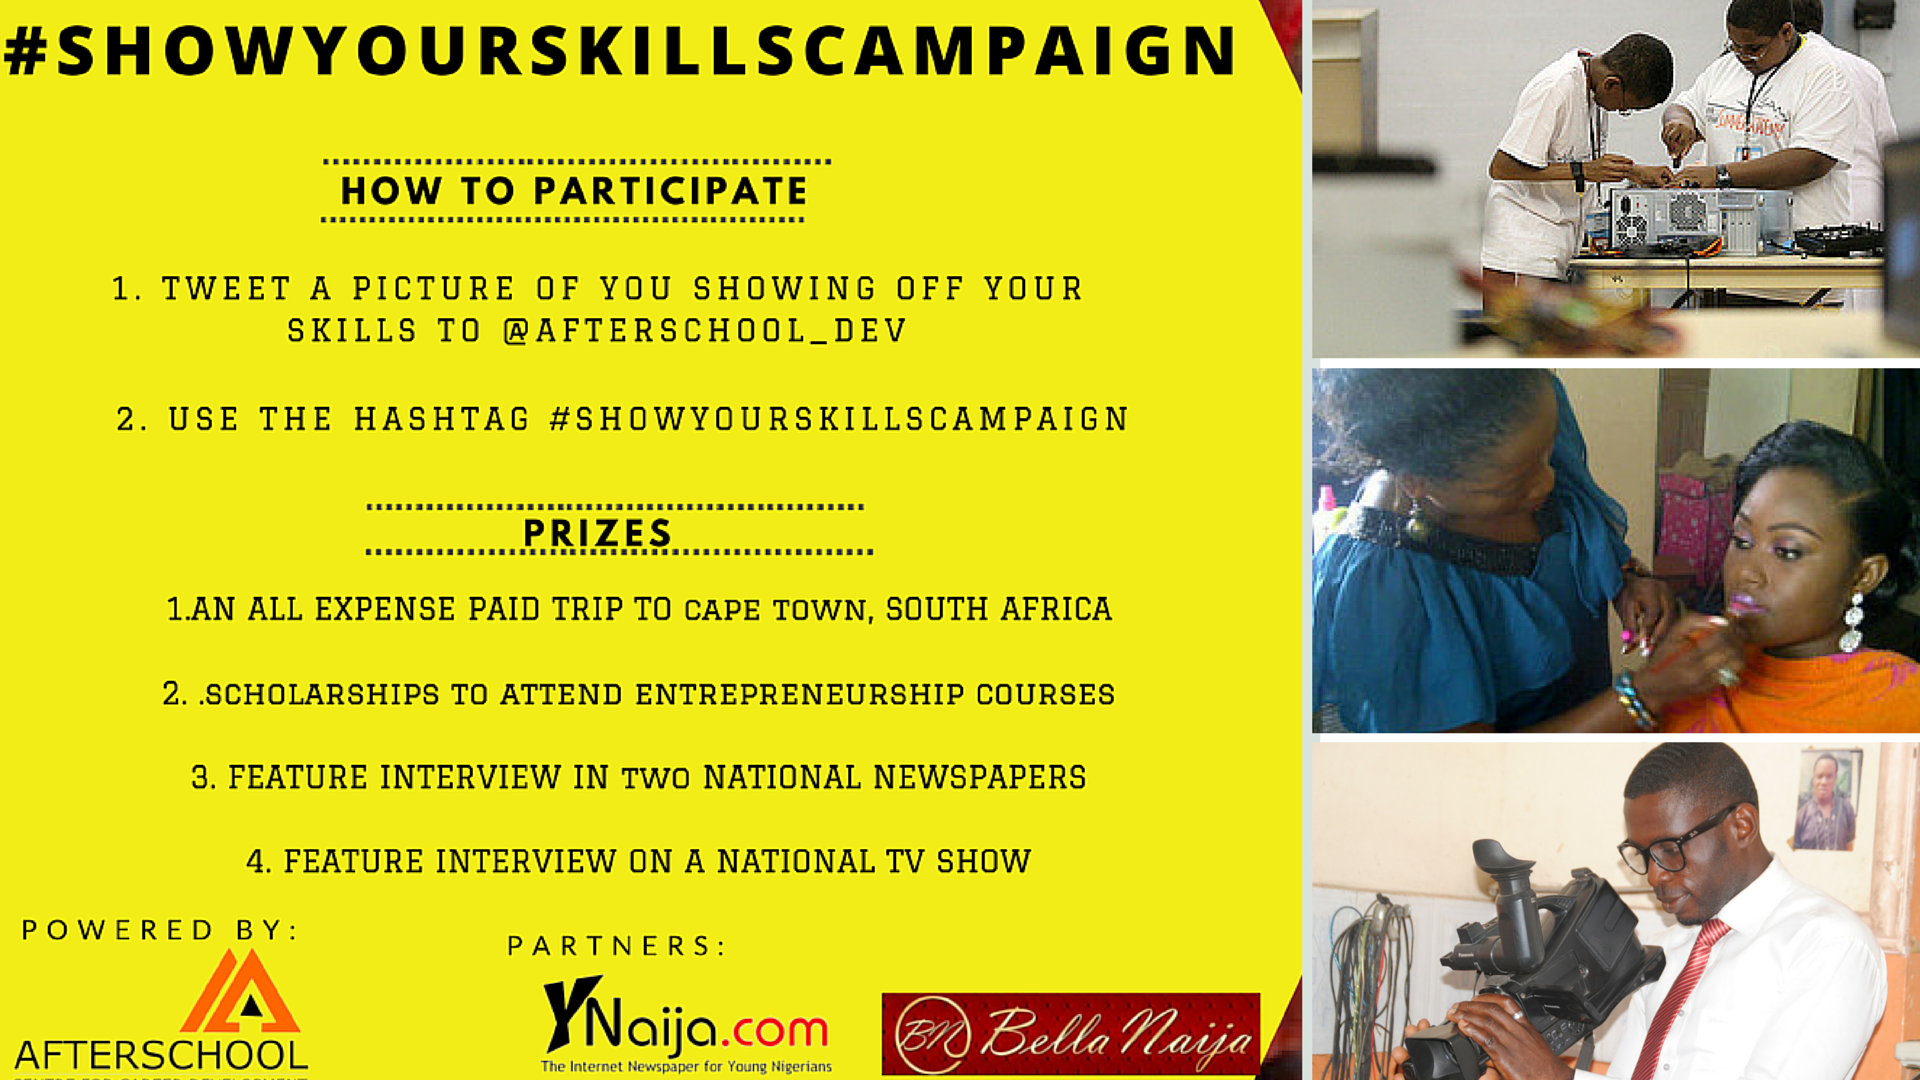 ACCD #ShowYourSkillsCampaign Photo Contest 2015 – Win a trip to Cape Town, South Africa (all-expenses-paid)